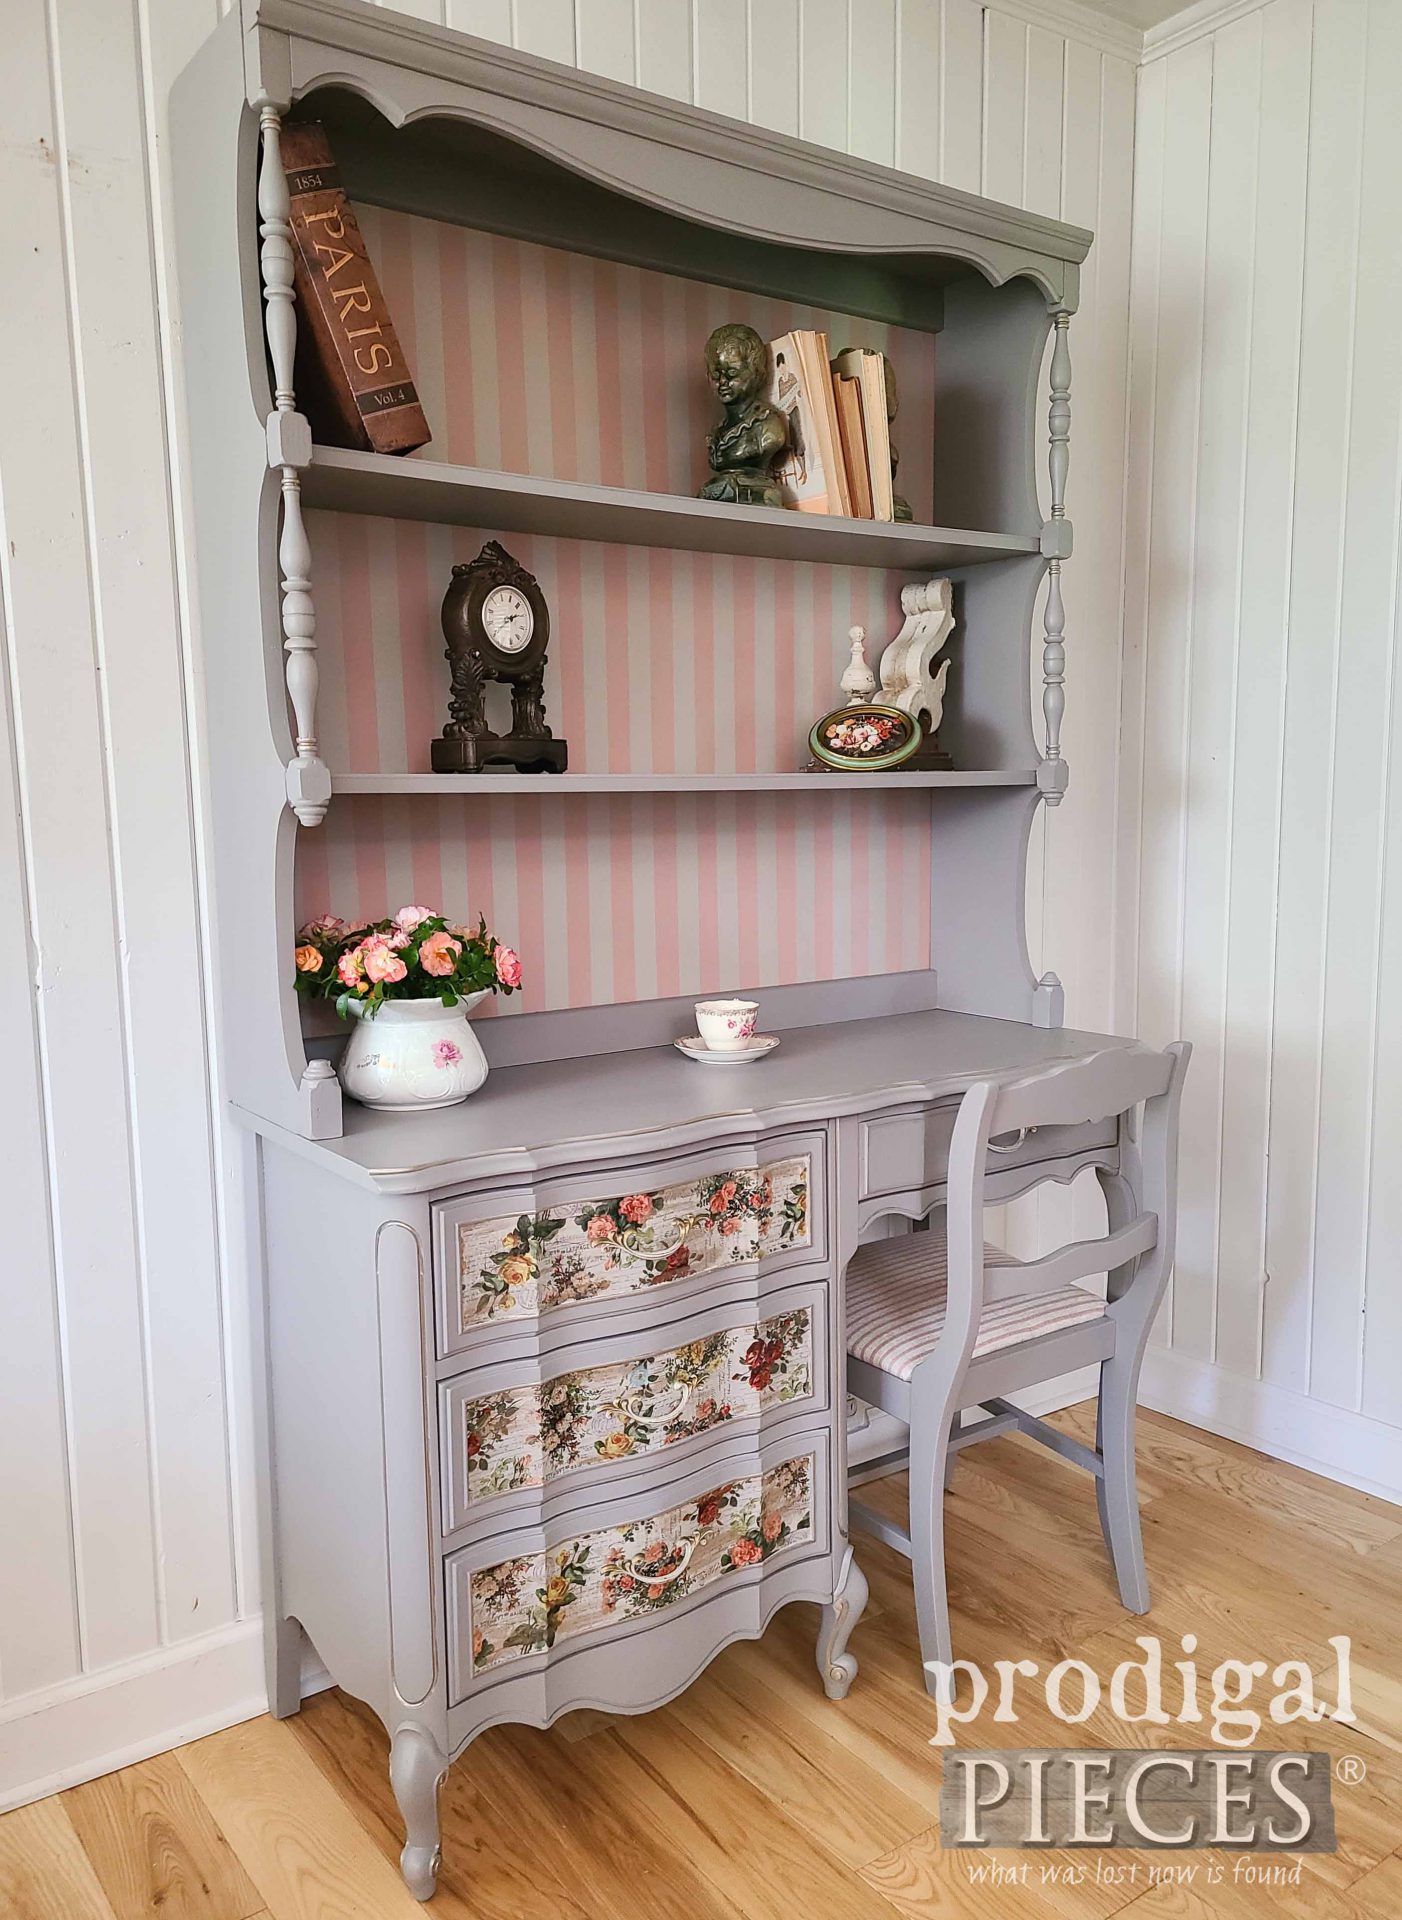 Side View of Vintage French Provincial Desk Makeover by Larissa of Prodigal Pieces | prodigalpieces.com #prodigalpieces #vintage #desk #homedecor